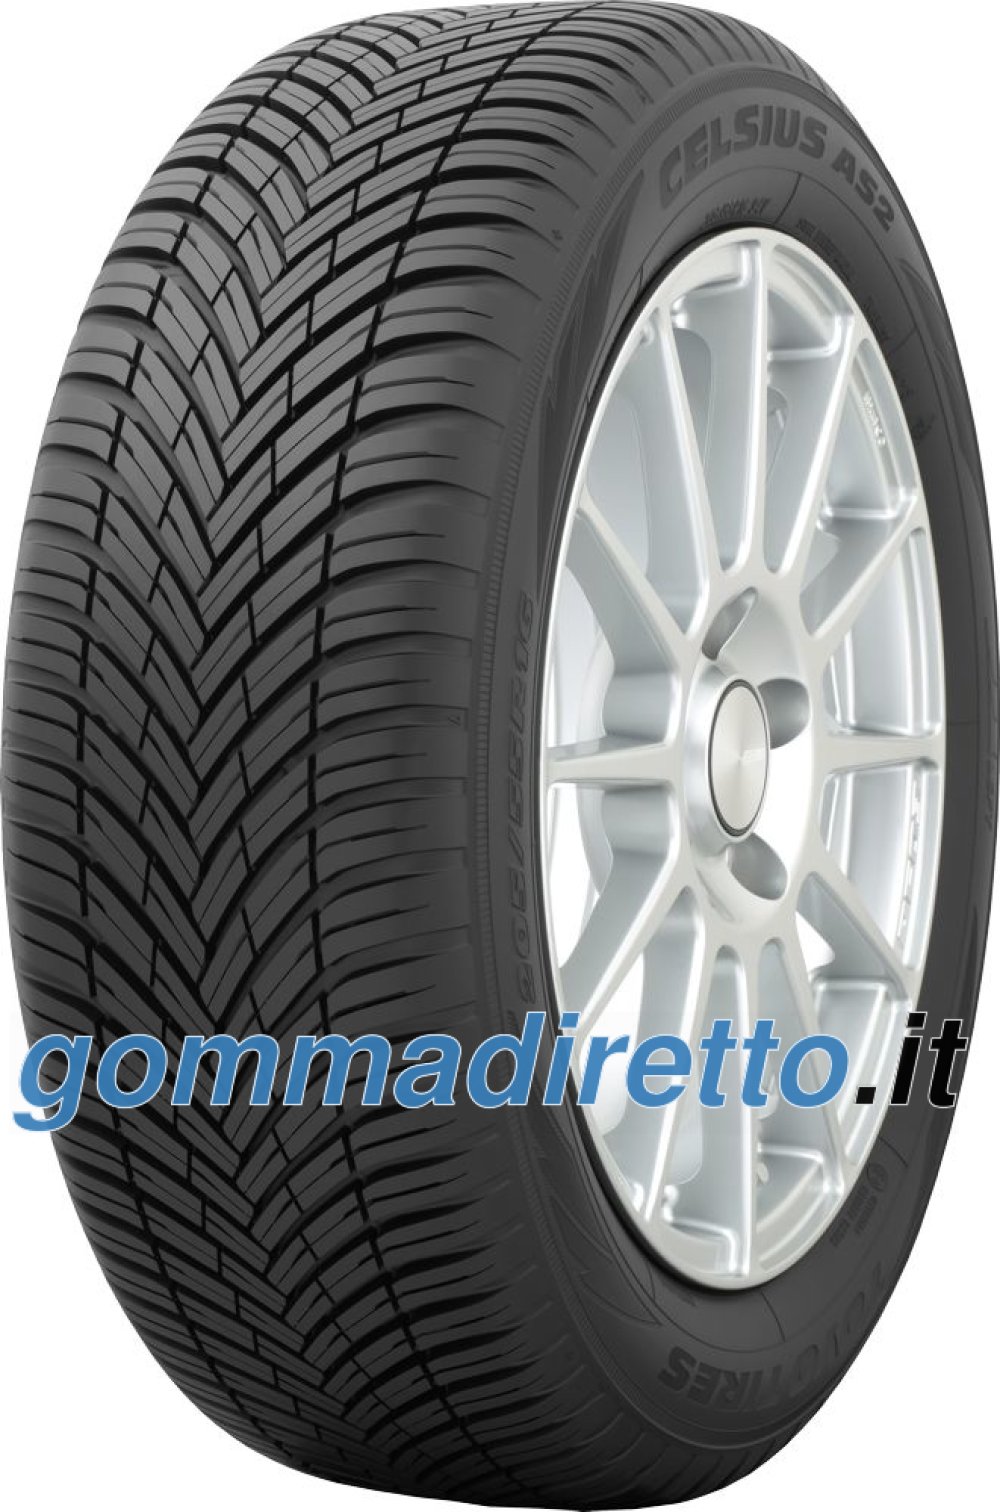 Image of Toyo Celsius AS2 ( 225/55 R16 99W XL )